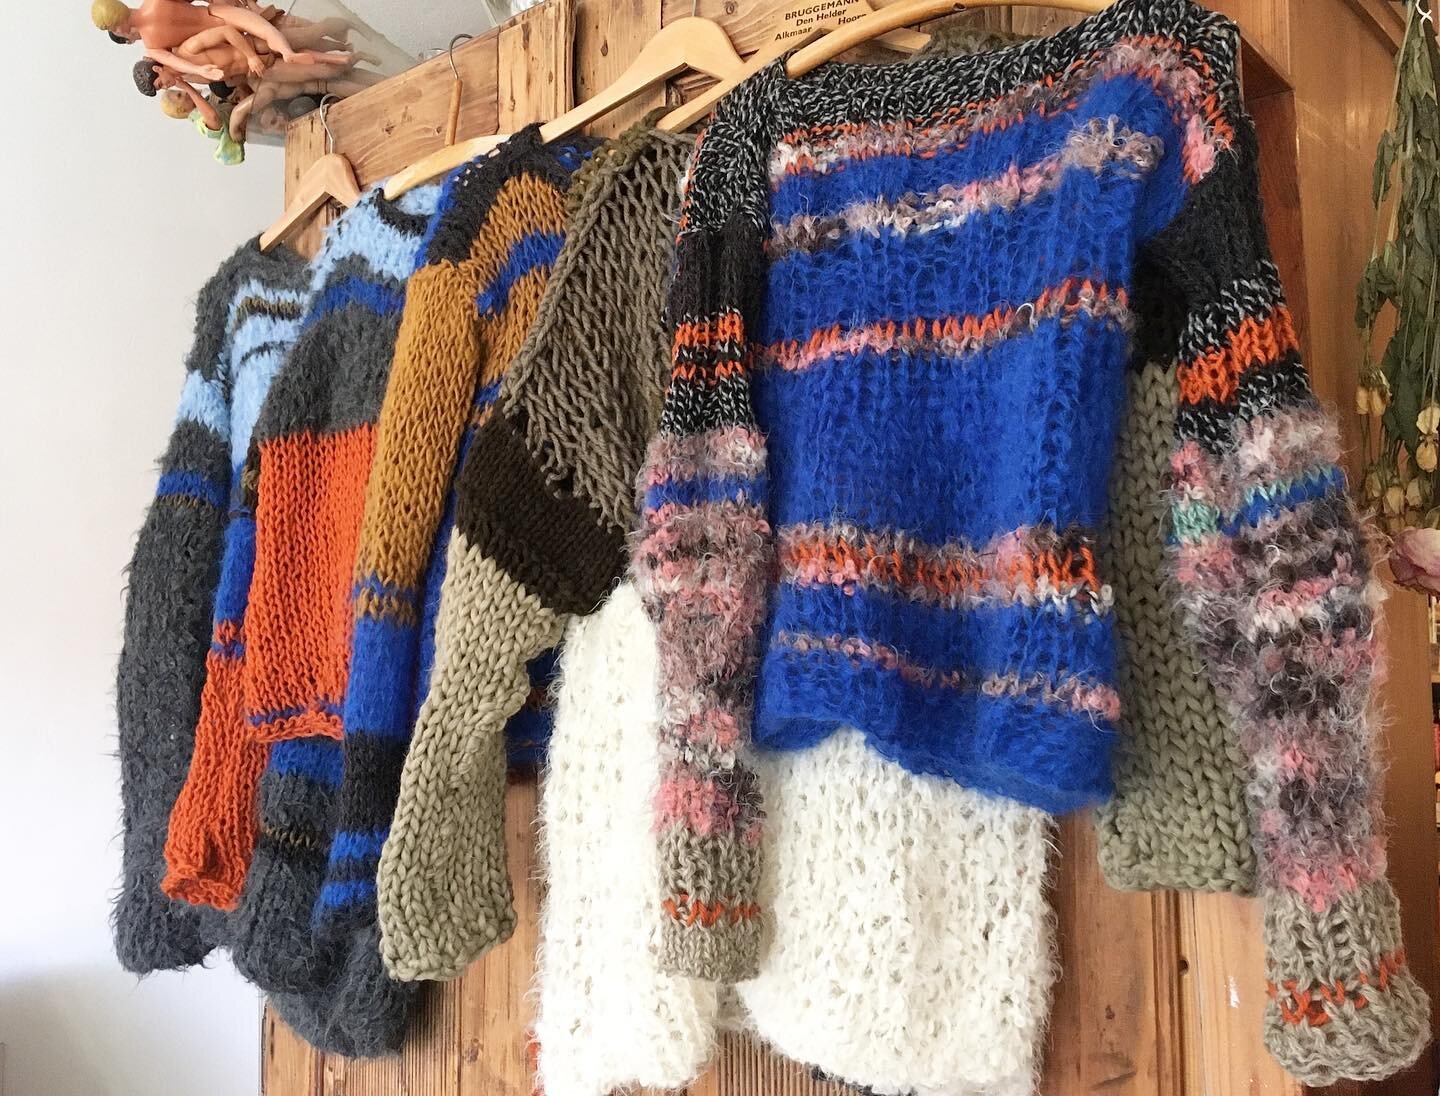 5 of five in five weeks.lazy knitter using 9 to 20
#knitting #knitwear #size36 ;) that&rsquo;s me #sweaters #homemade #clothes #clothing #design #colorstudy #colorful #seethrough #seethroughtops #short #shortstyles #whoisafraidofredyellowandblue with